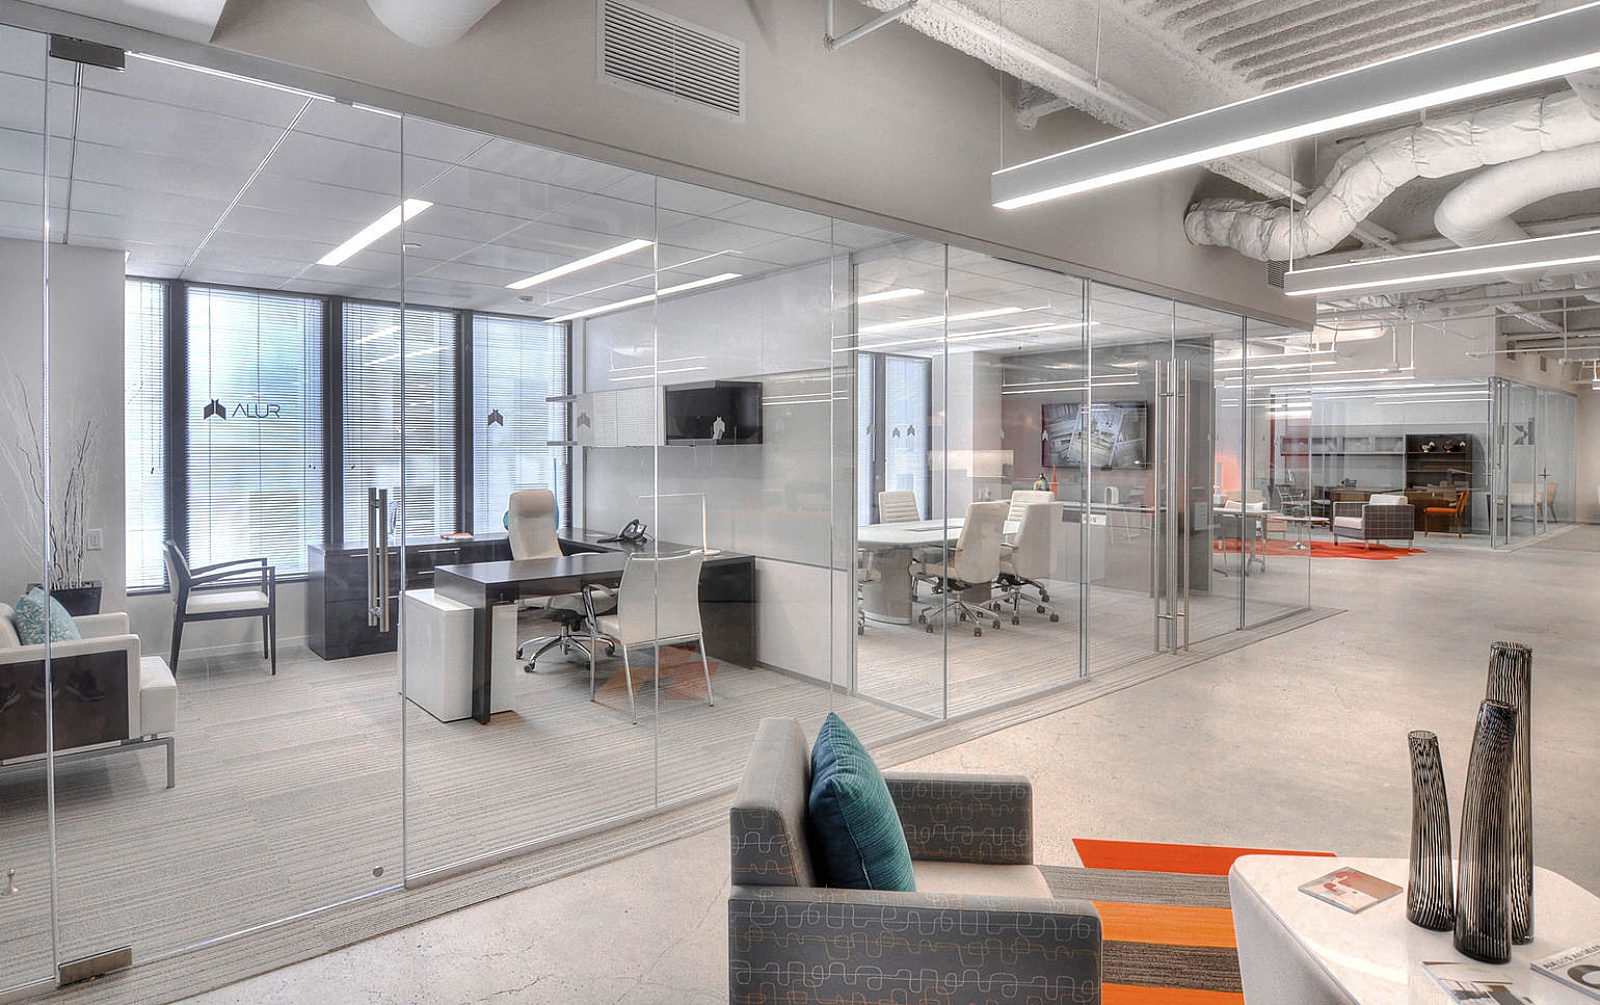 Bright space with a row of glass-front offices; clear glass with silver trim; U-shape desk in one office and conference setting in the other.